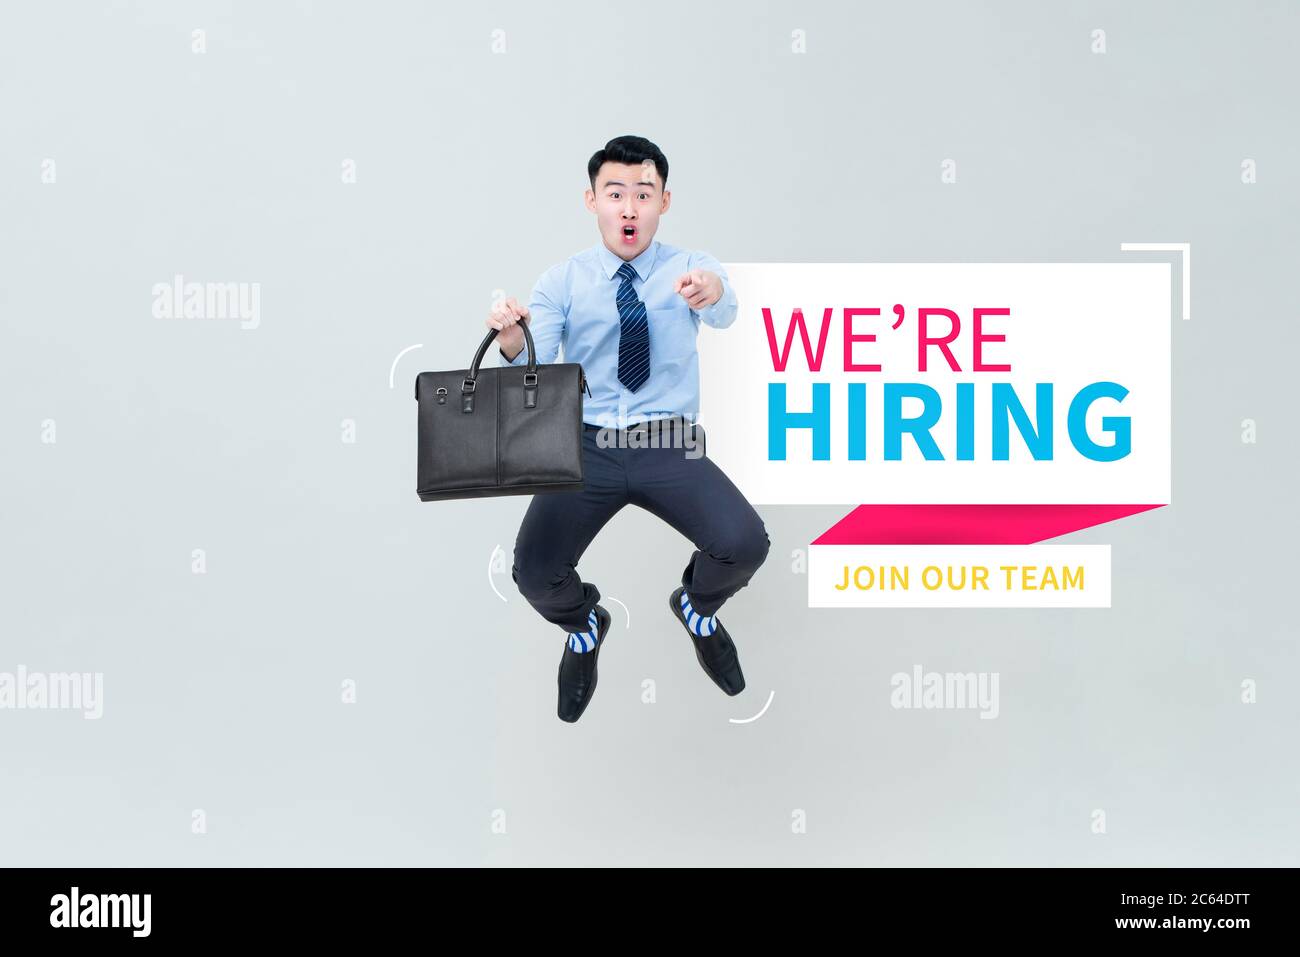 Excited young Asian businessman jumping and pointing finger at camera next to We're hiring and join our team text on light gray background Stock Photo